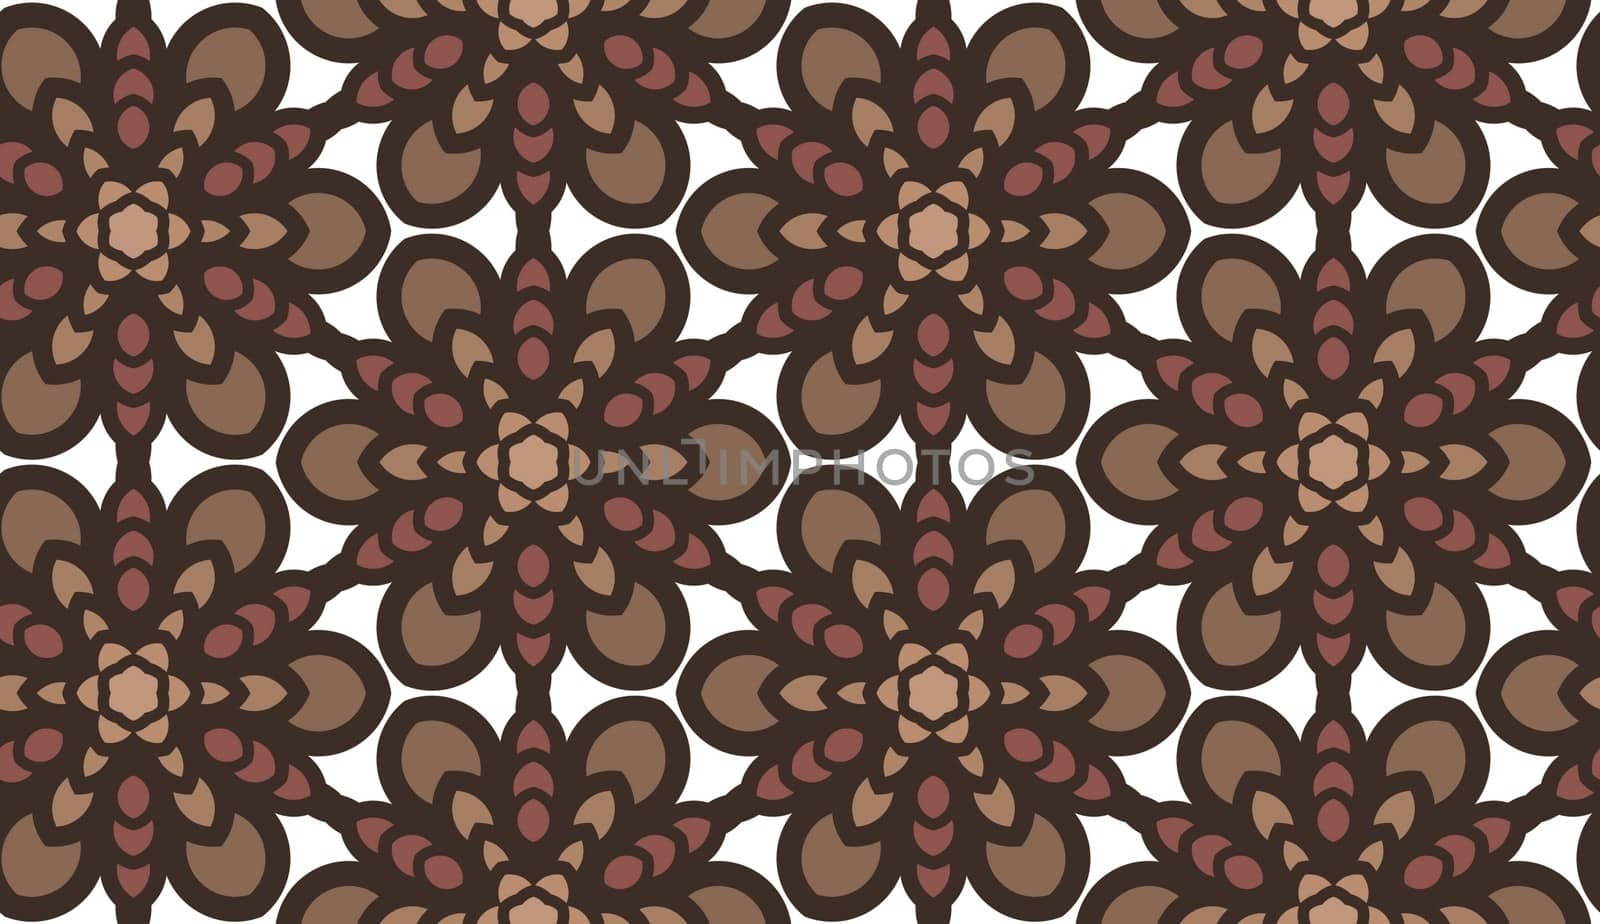 Illustration of a brown and white seamless background